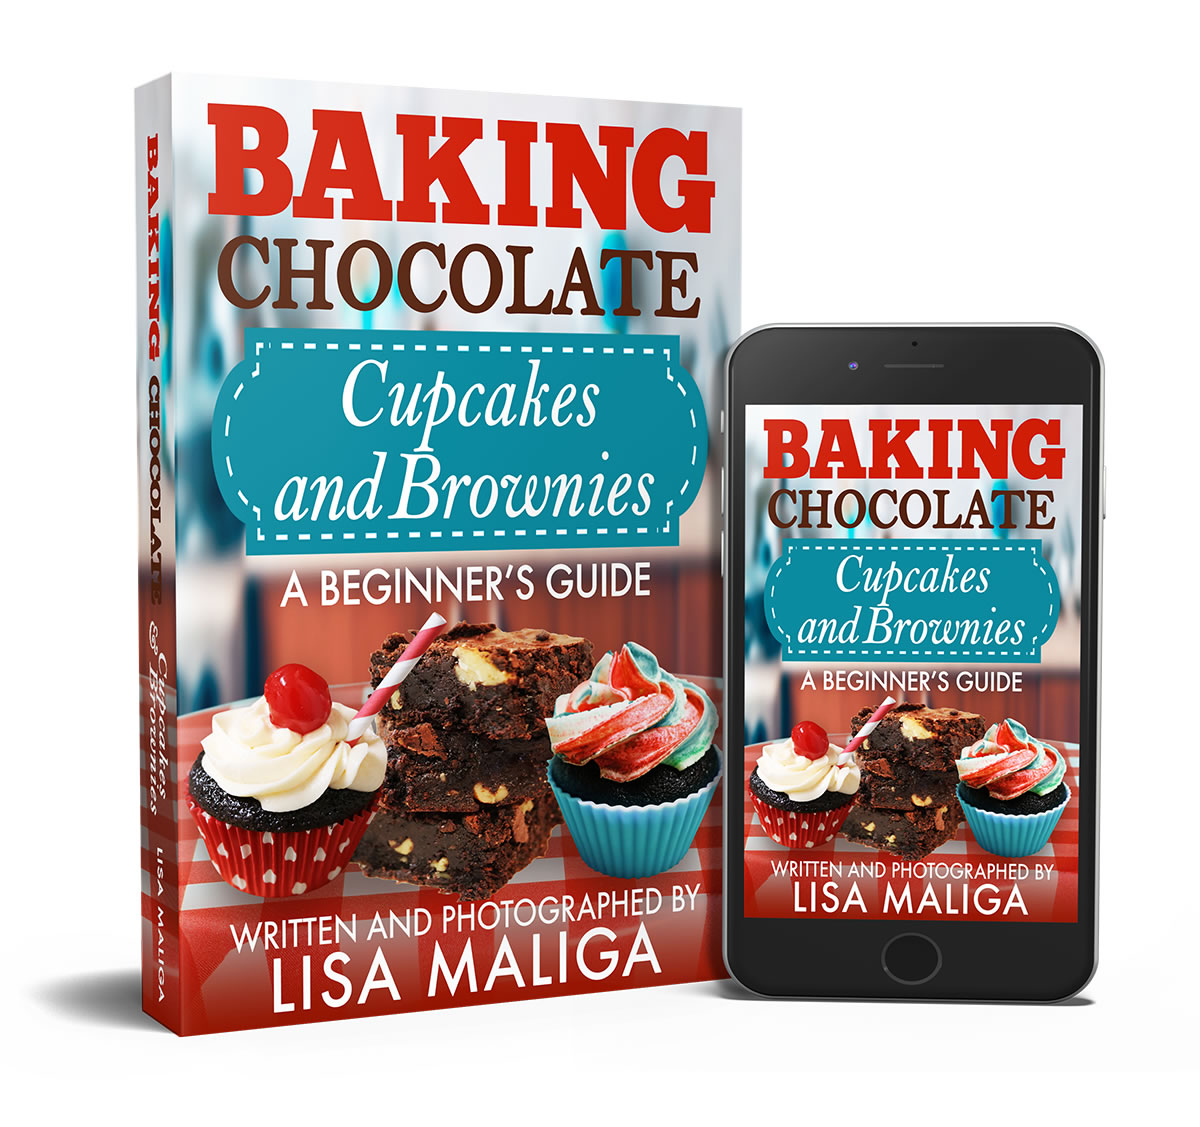 baking chocolate cupcakes and brownies a beginner's guide by lisa maliga